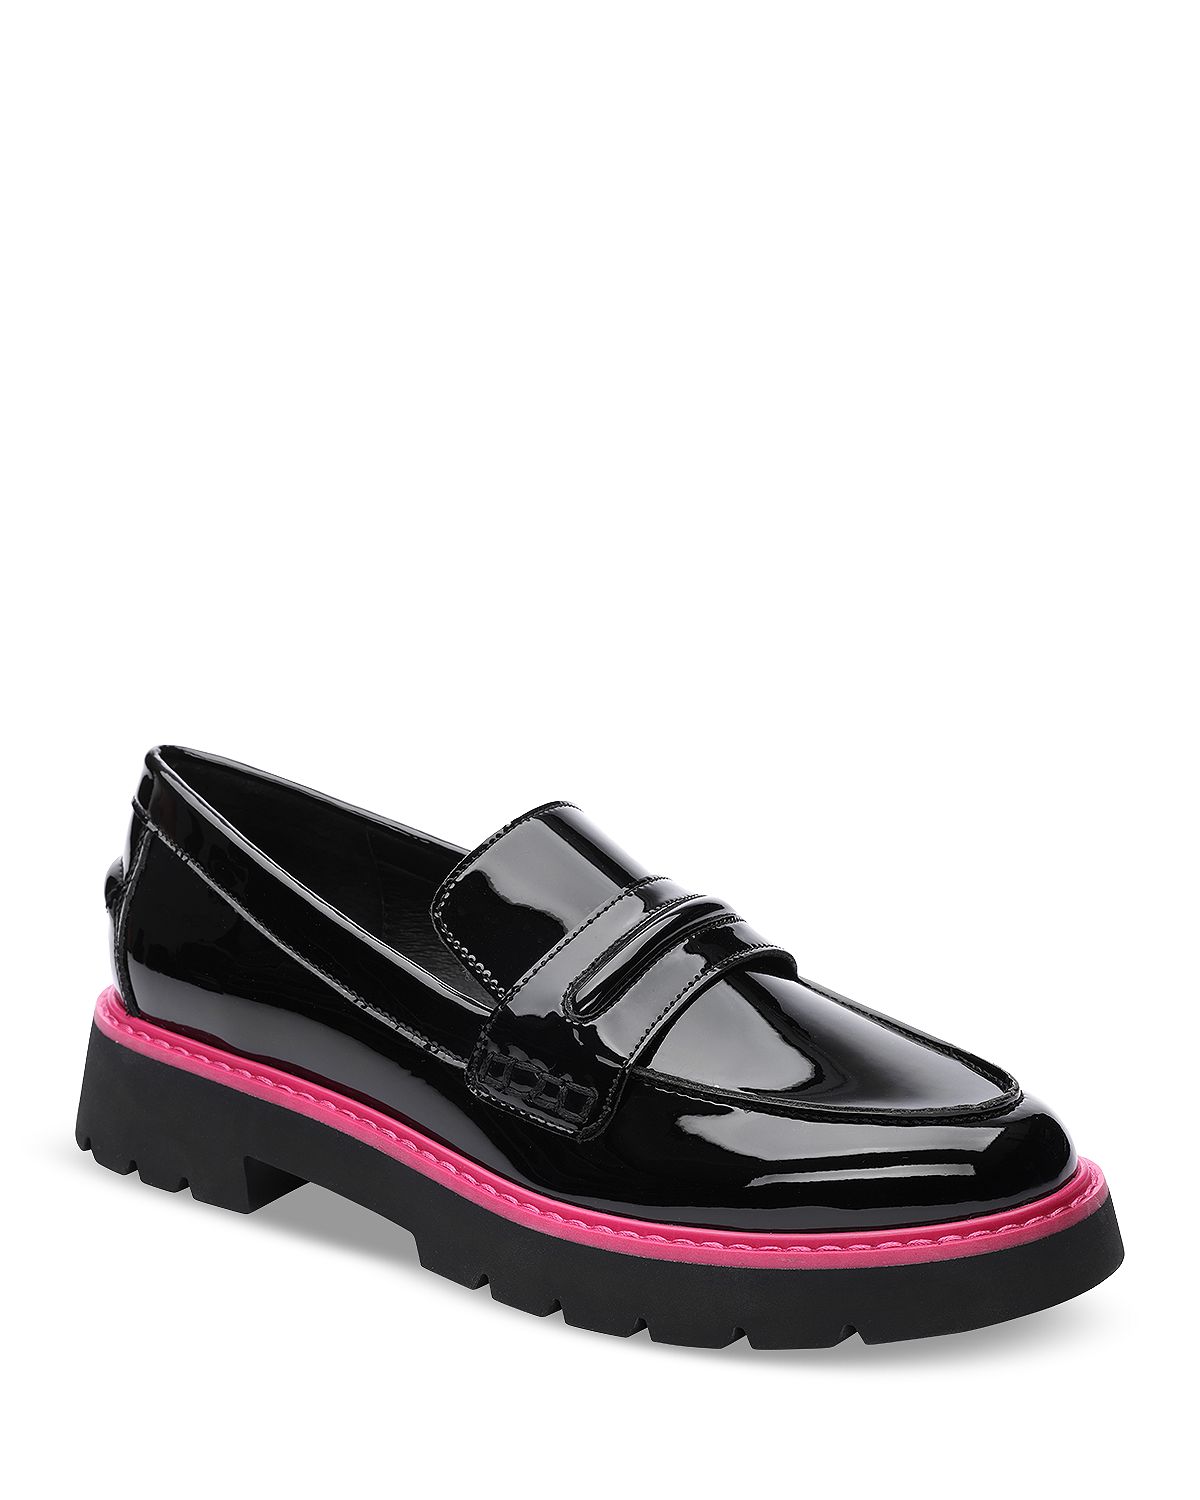 Photo 1 of Women's Westside 2.0 Loafers Size 10M